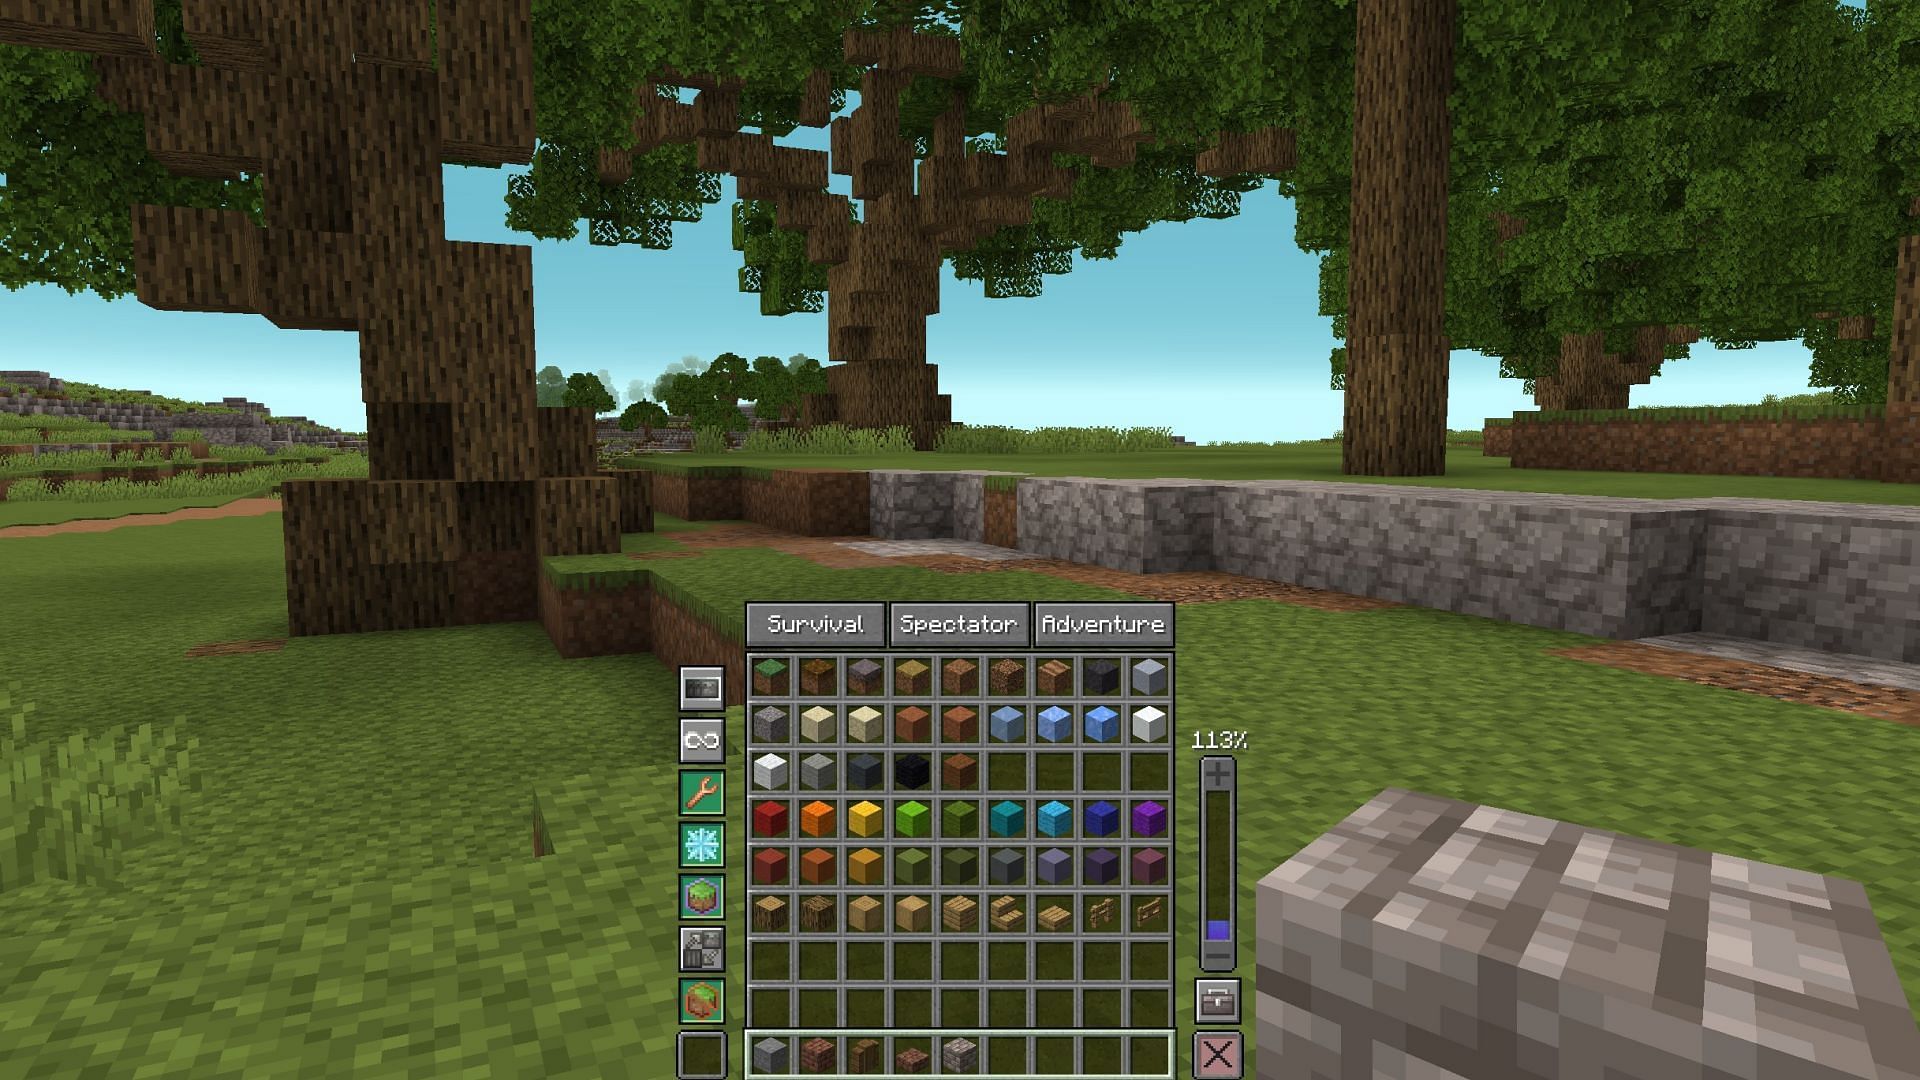 Builder mode in the Axiom mod for Minecraft (Image via Modrinth/Moulberry)